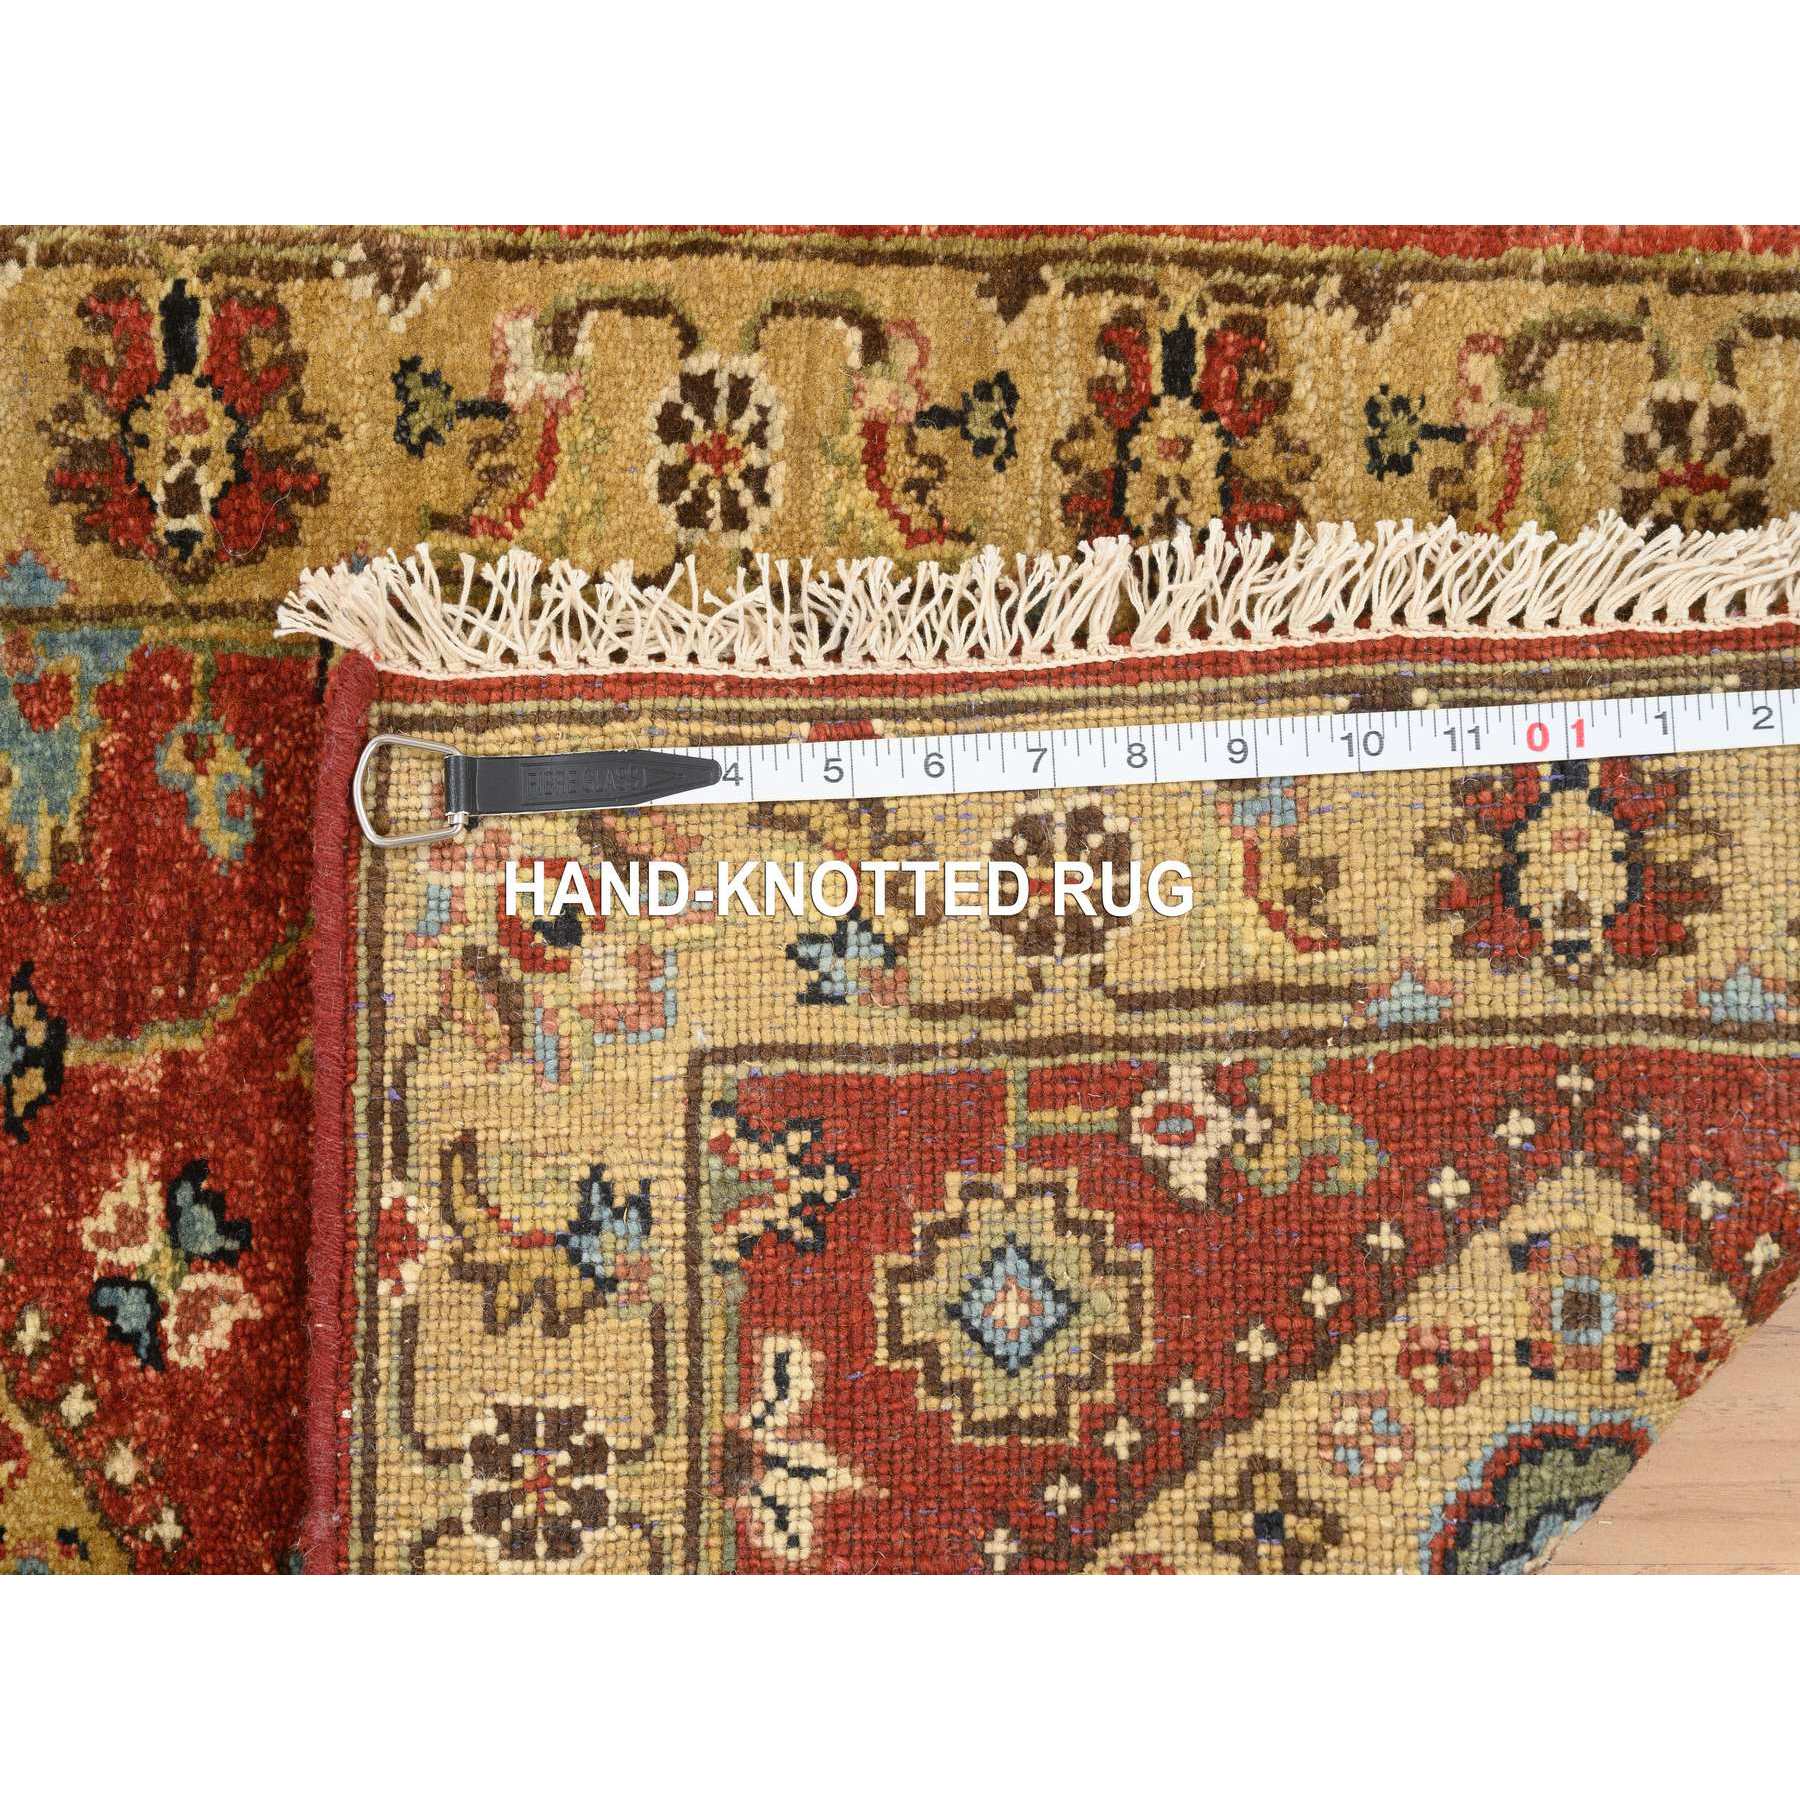 2'1"x3' Red-Gold, Karajeh Design, with Geometric Medallions Design, Hand Woven, Pure Wool, Oriental Rug 